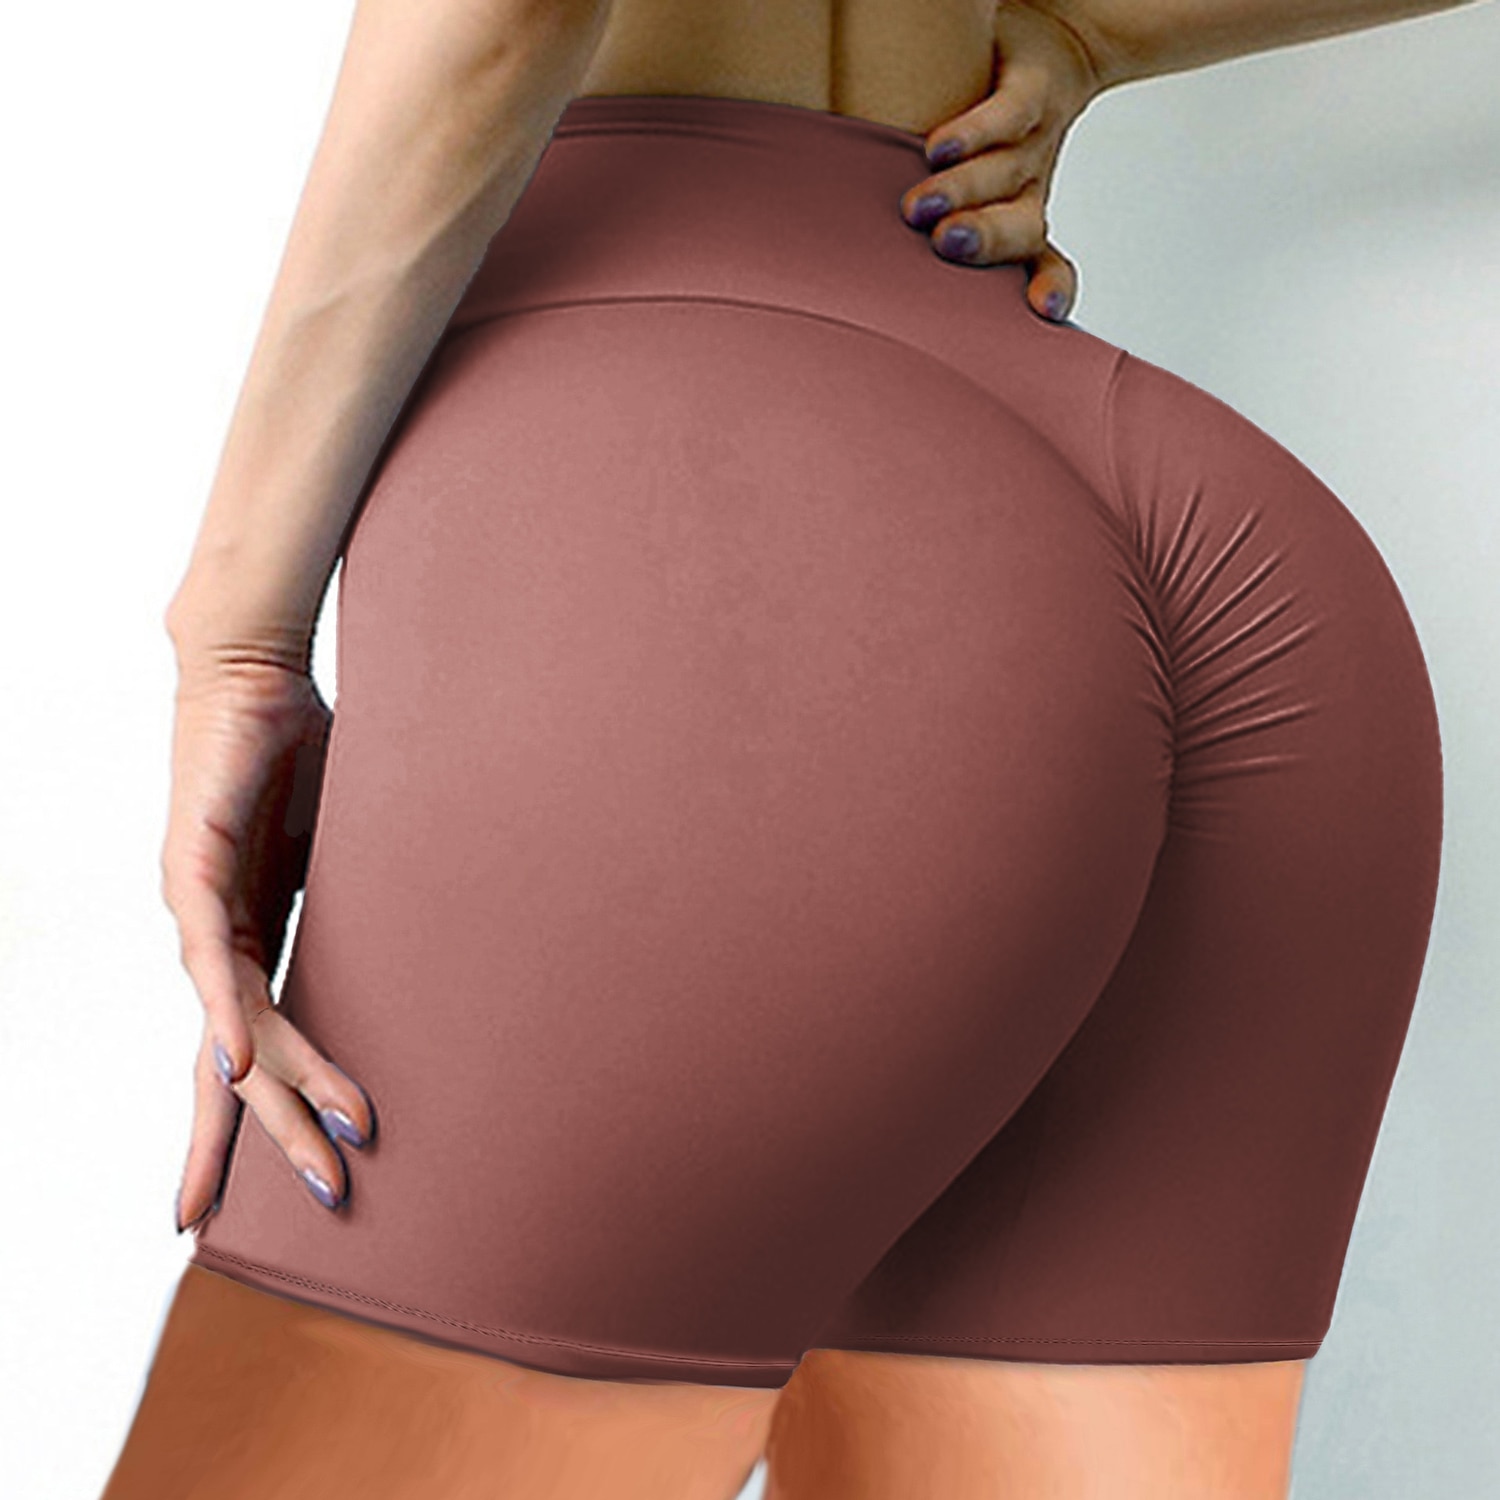 Women's High Waist Yoga Shorts Scrunch Butt Shorts Bottoms Tummy Control  Butt Lift Quick Dry Solid Color Violet Pink Burgundy Spandex Yoga Fitness  Gym Workout Summer Sports Activewear High Elasticity 2024 - $11.99